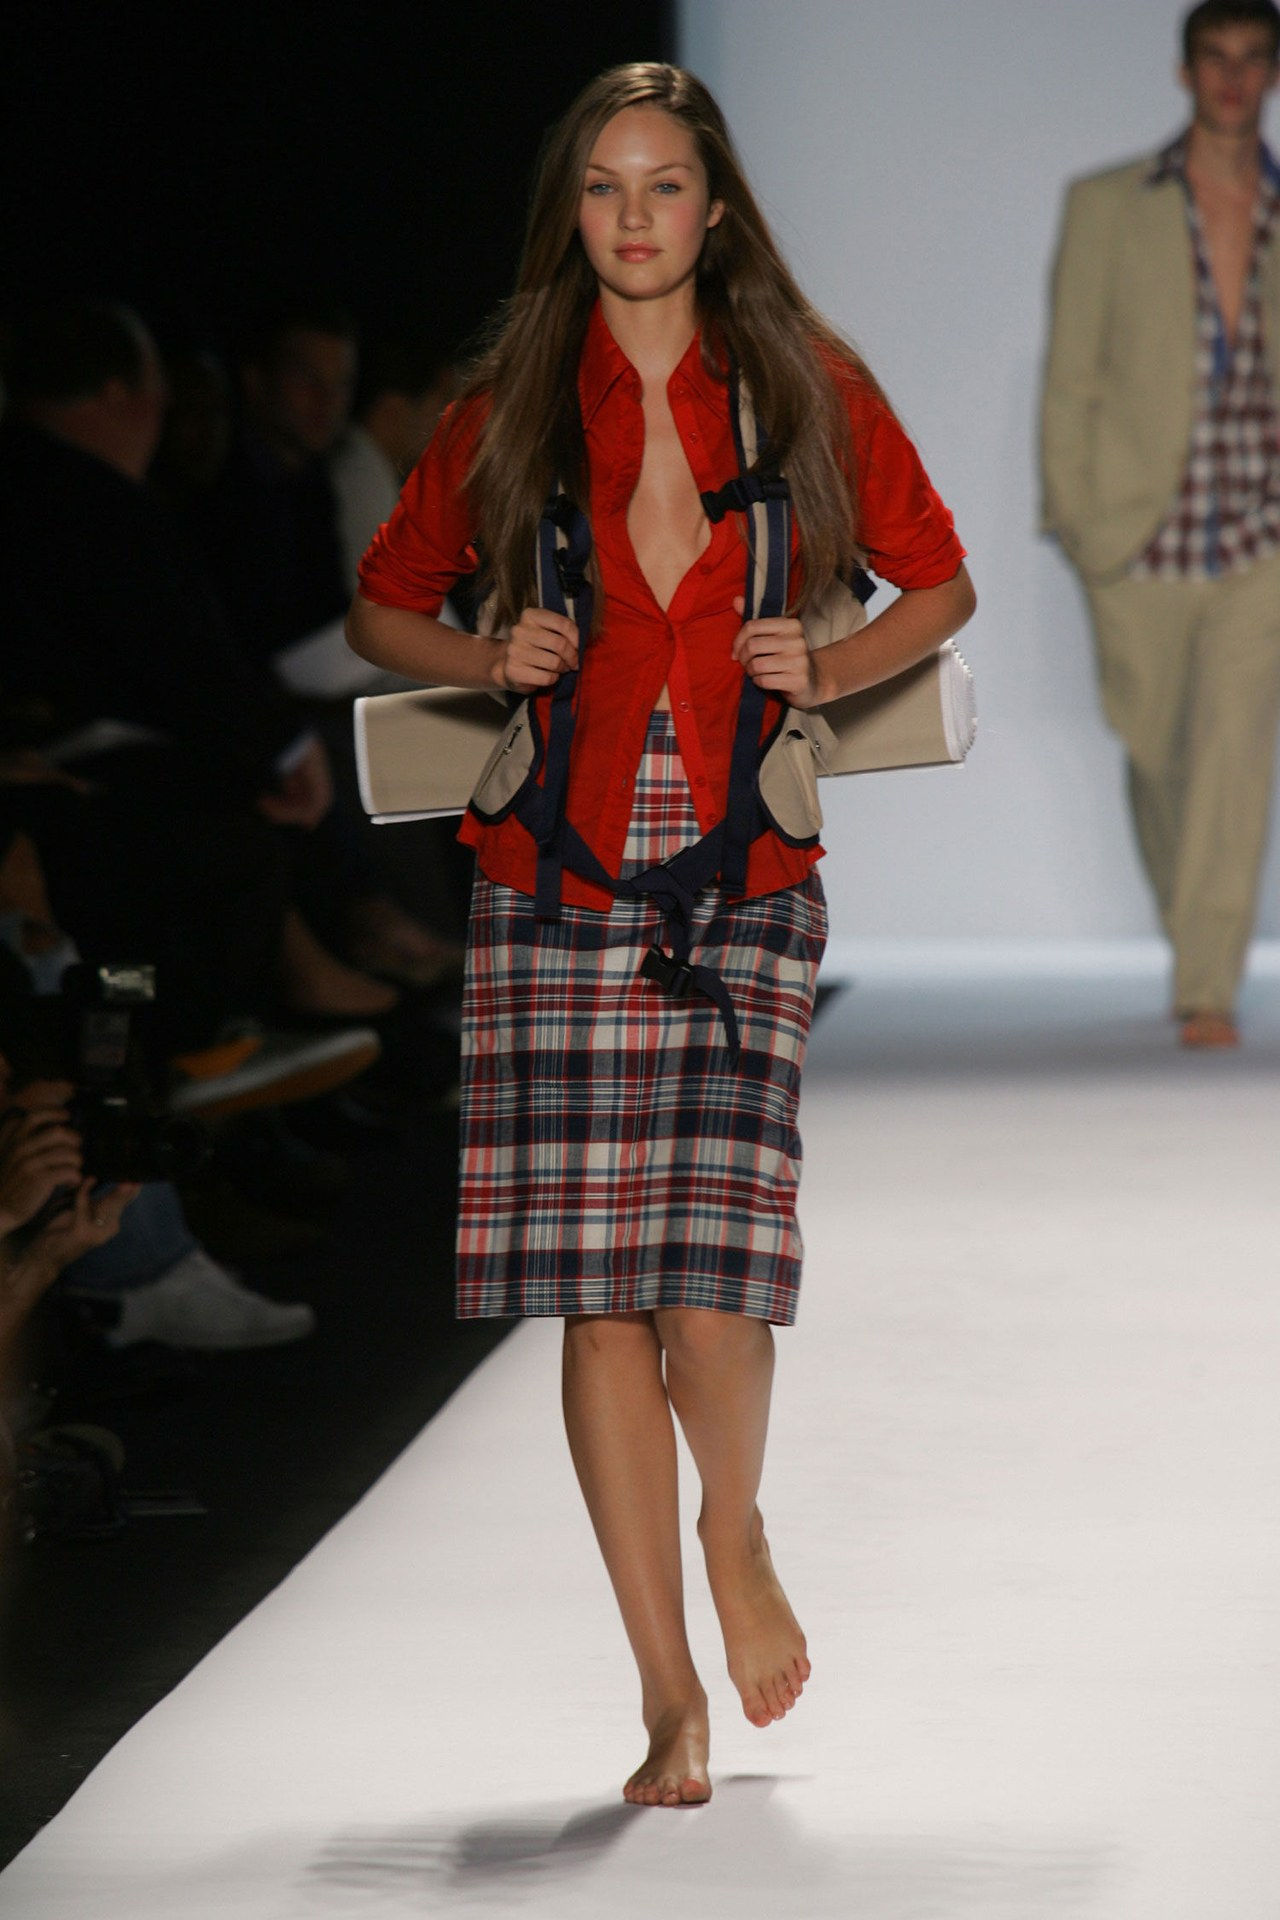 candice swanepoel first runway show tommy hilfiger spring 2006